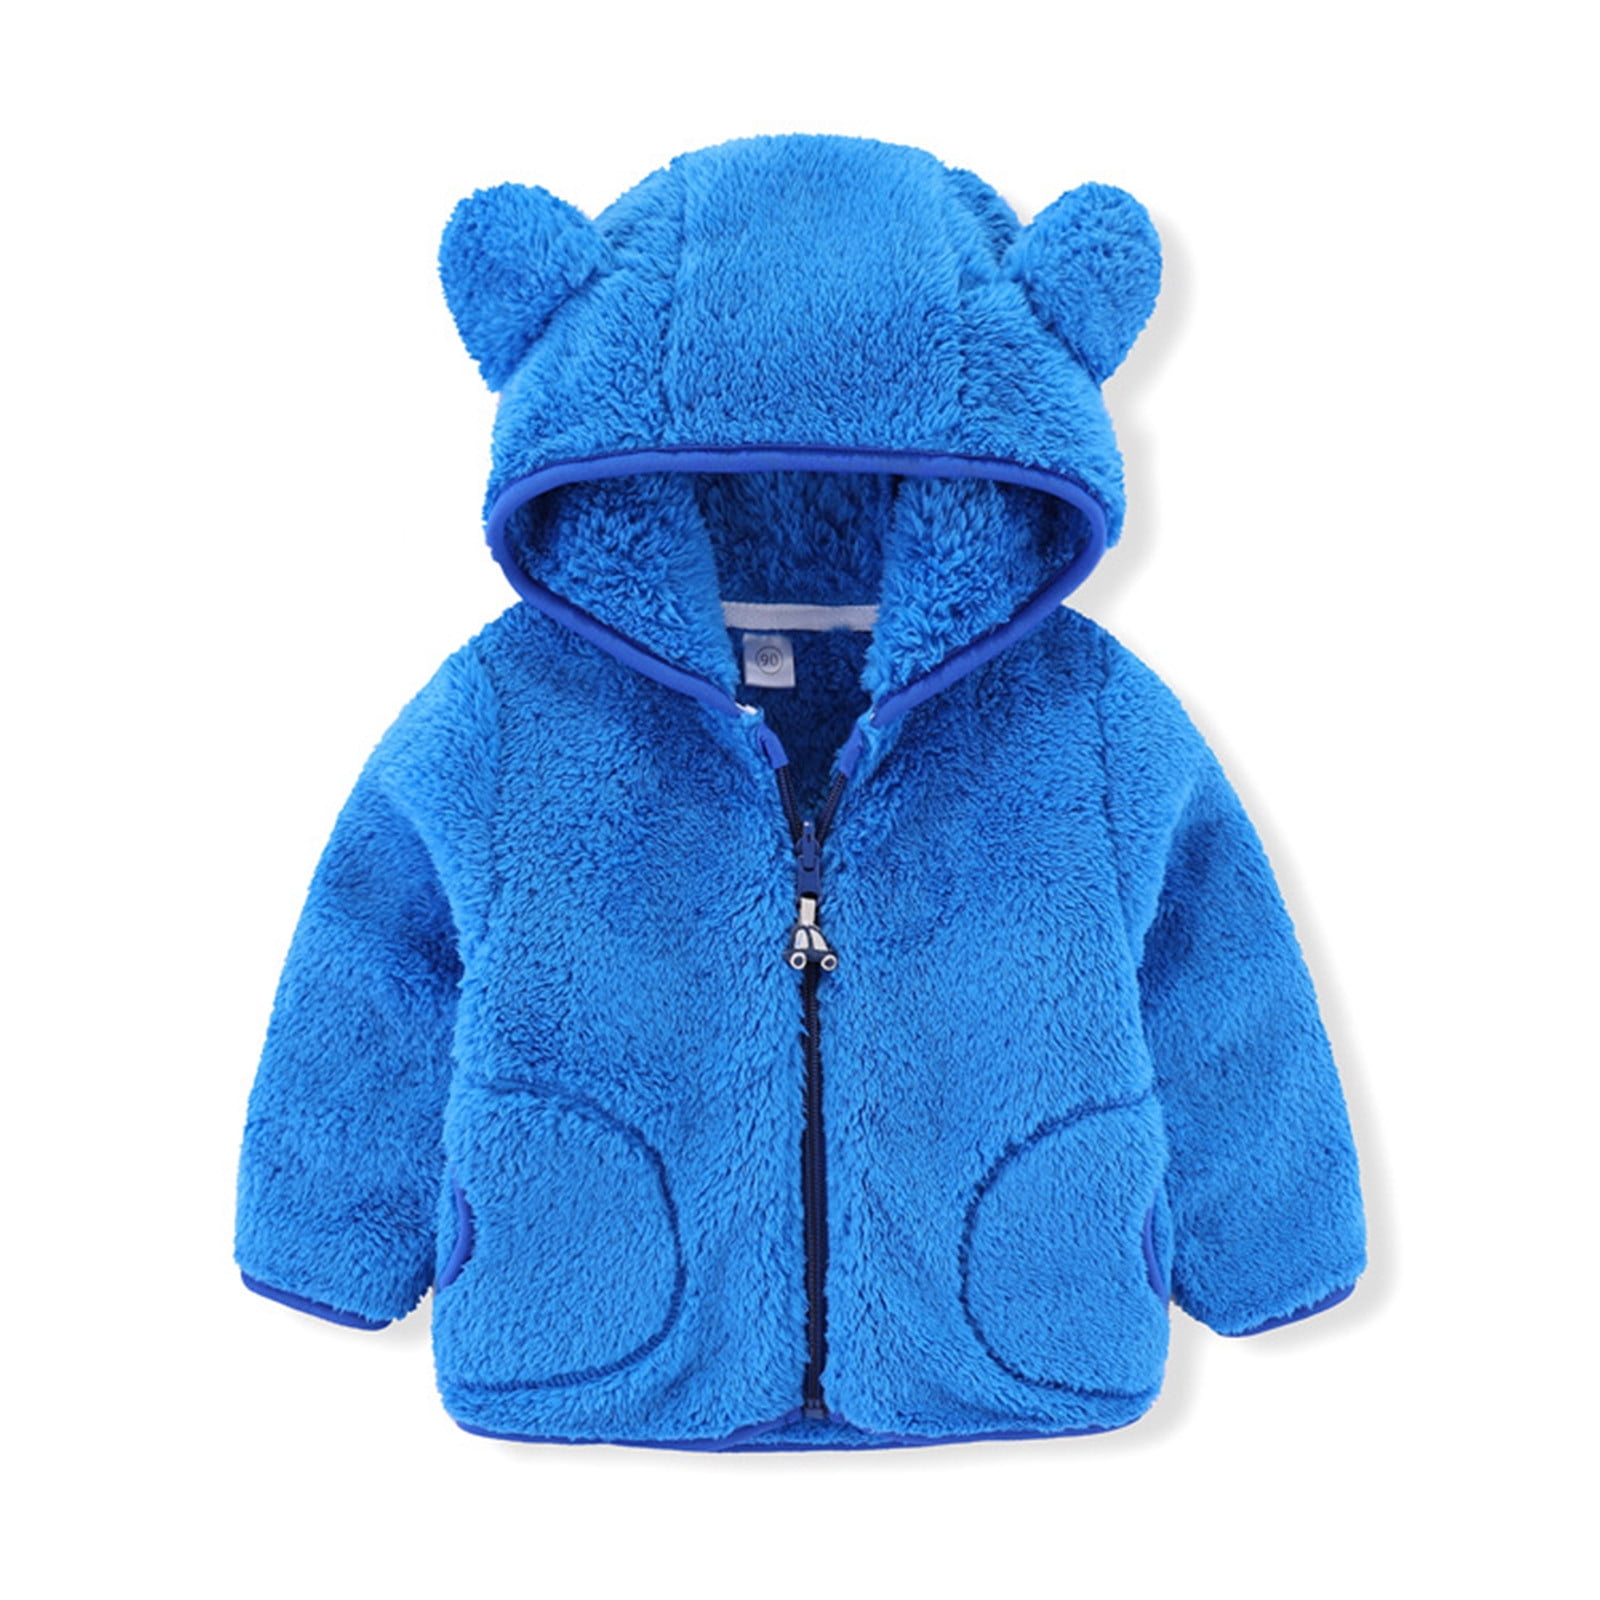 waitFOR Toddlers Kids Solid Bear Ear Hoodies Down Jacket Baby Boys Girls Casual Long Sleeve Thick Windproof Coat Hoody Windbreaker Zipper Tops Wadded Coat Padded Outwear,Suit for 6 Months to 4 Years